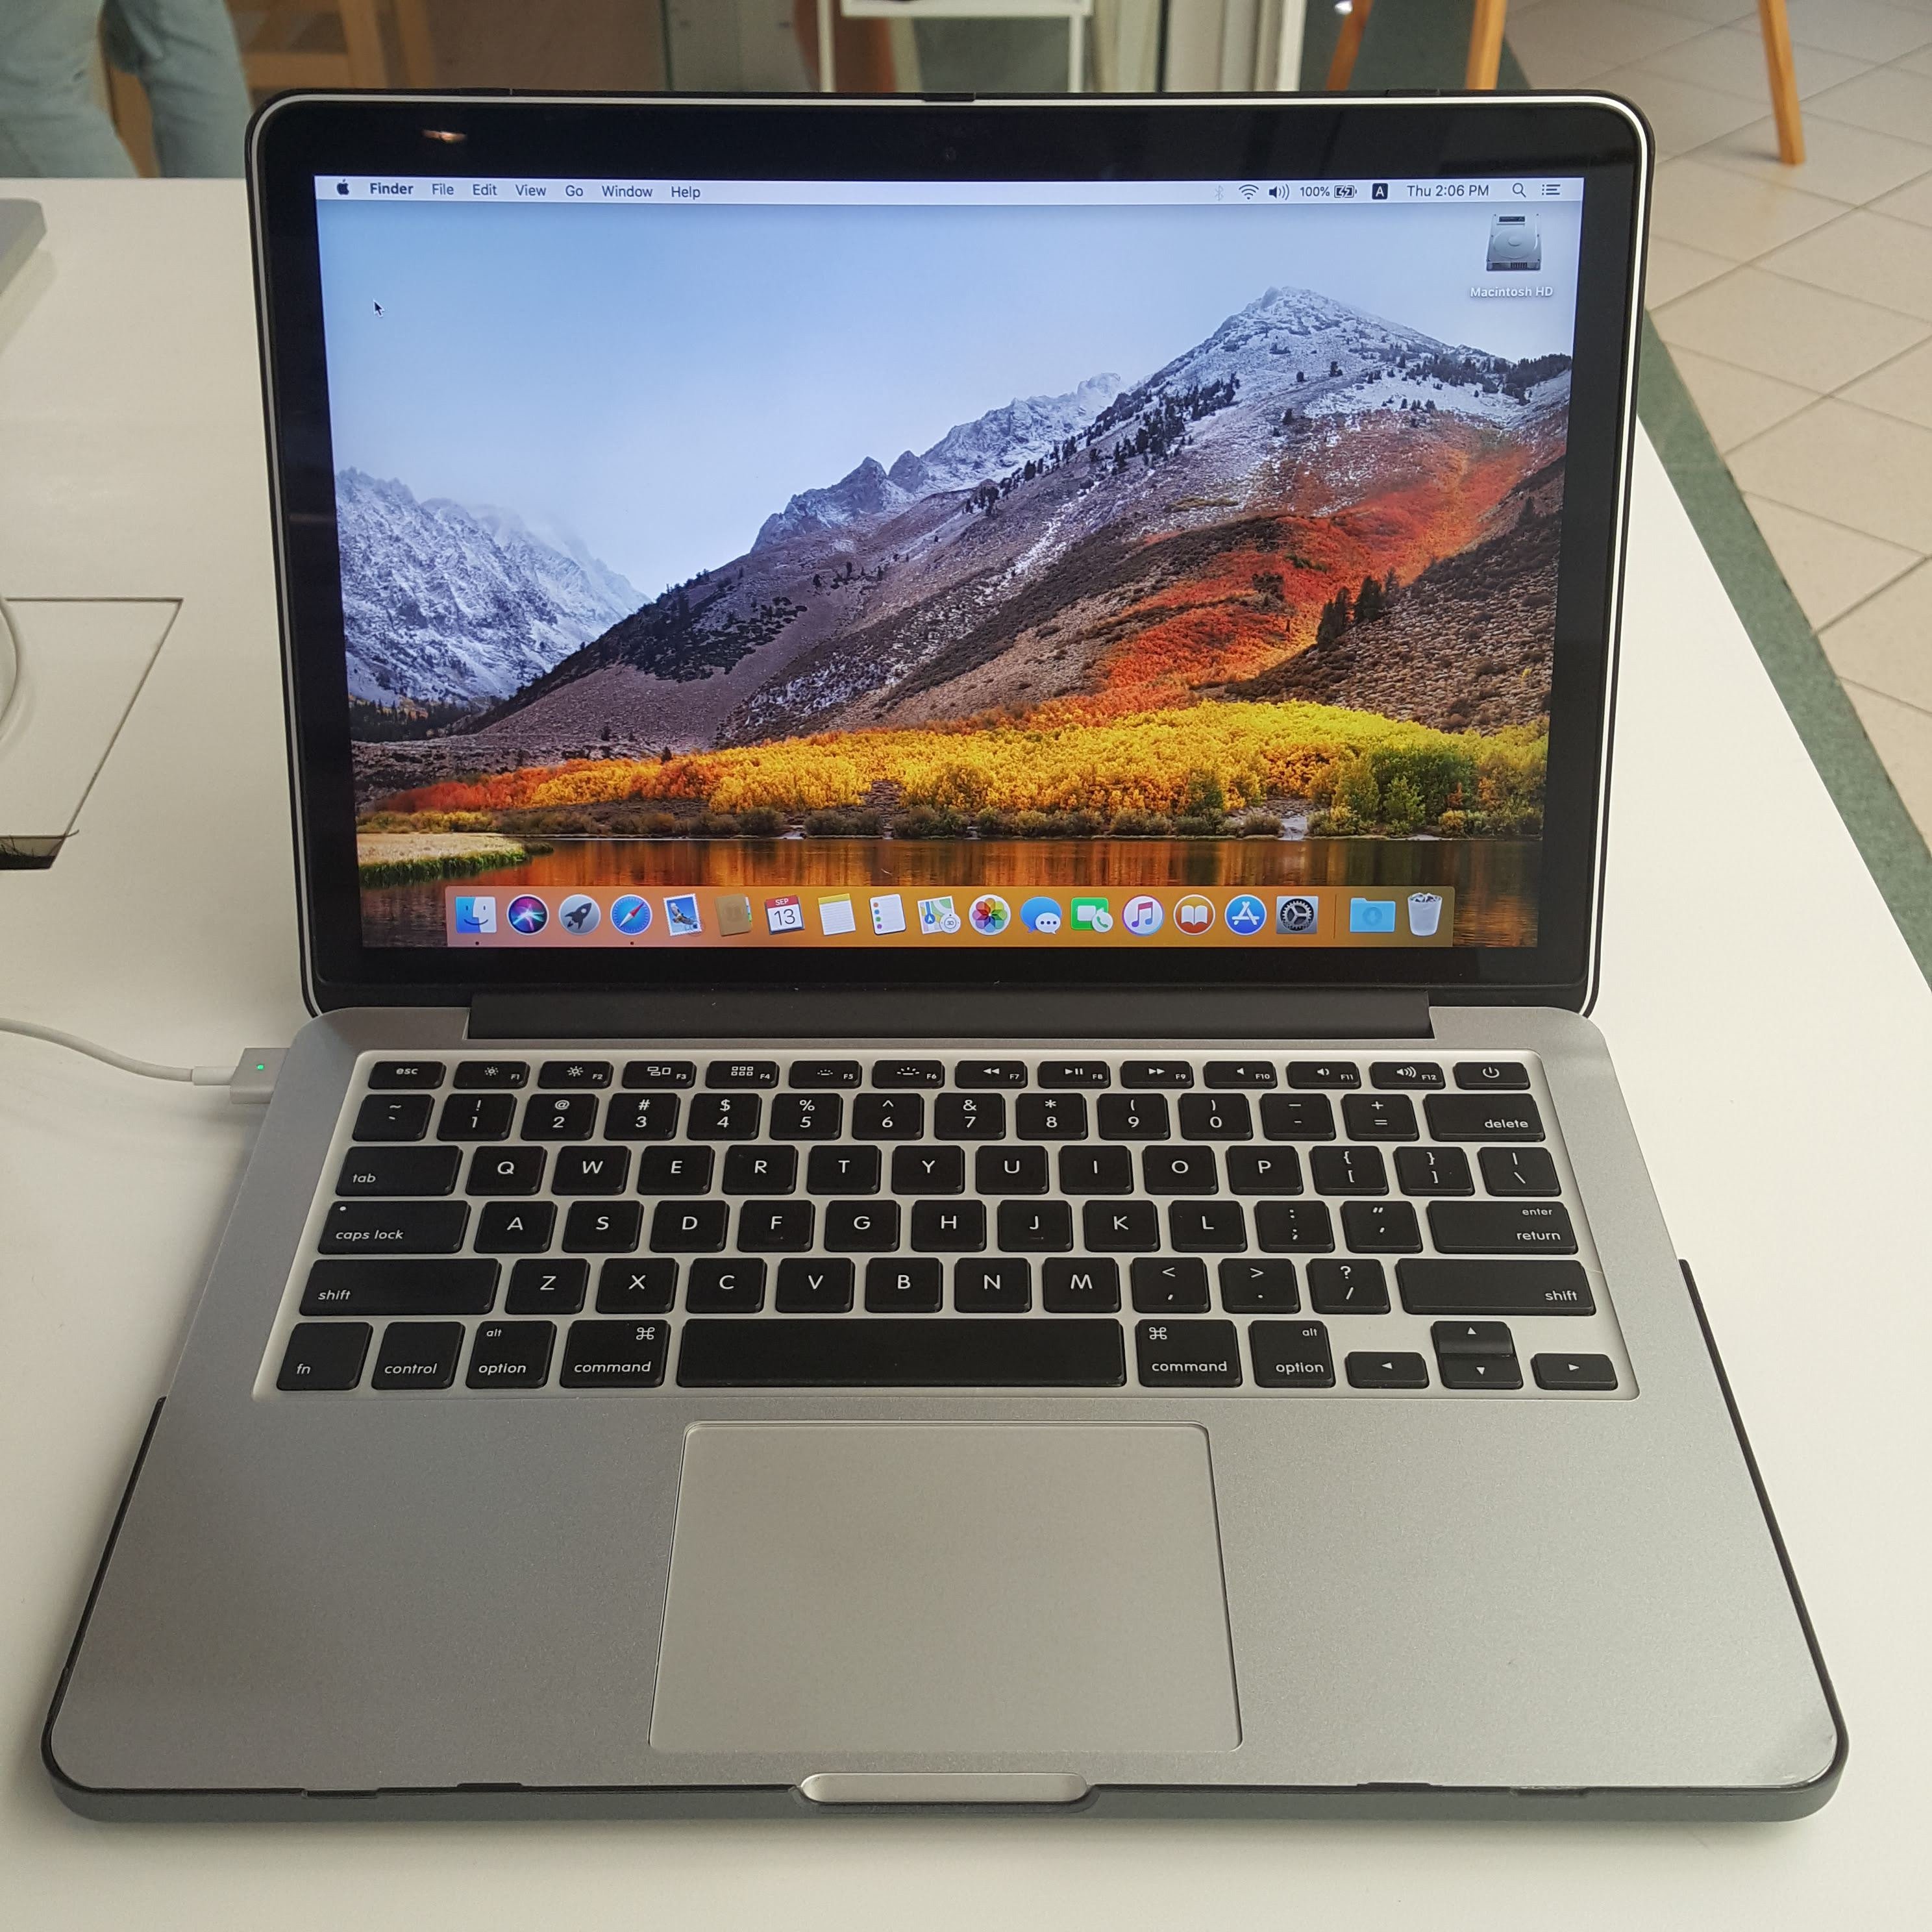 idt Gallery on X: "PRELOVED MacBook Pro (Retina, 13-inch, Early